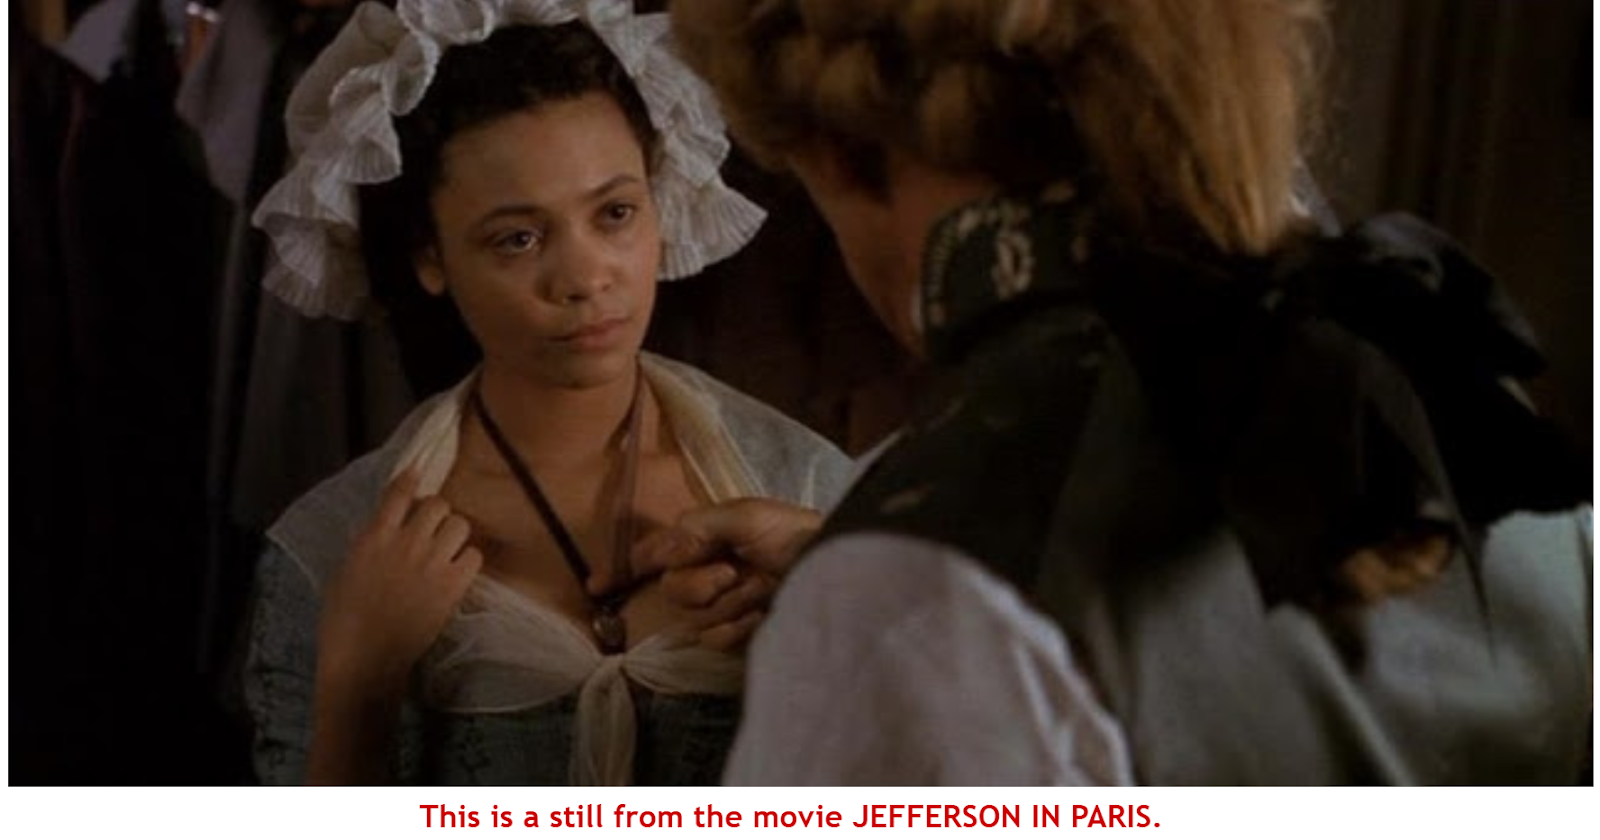 BLACK CHICK A LITTLE ROCKED: THE WHITE REWRITTEN HISTORY OF SALLY HEMINGS AND THOMAS ...